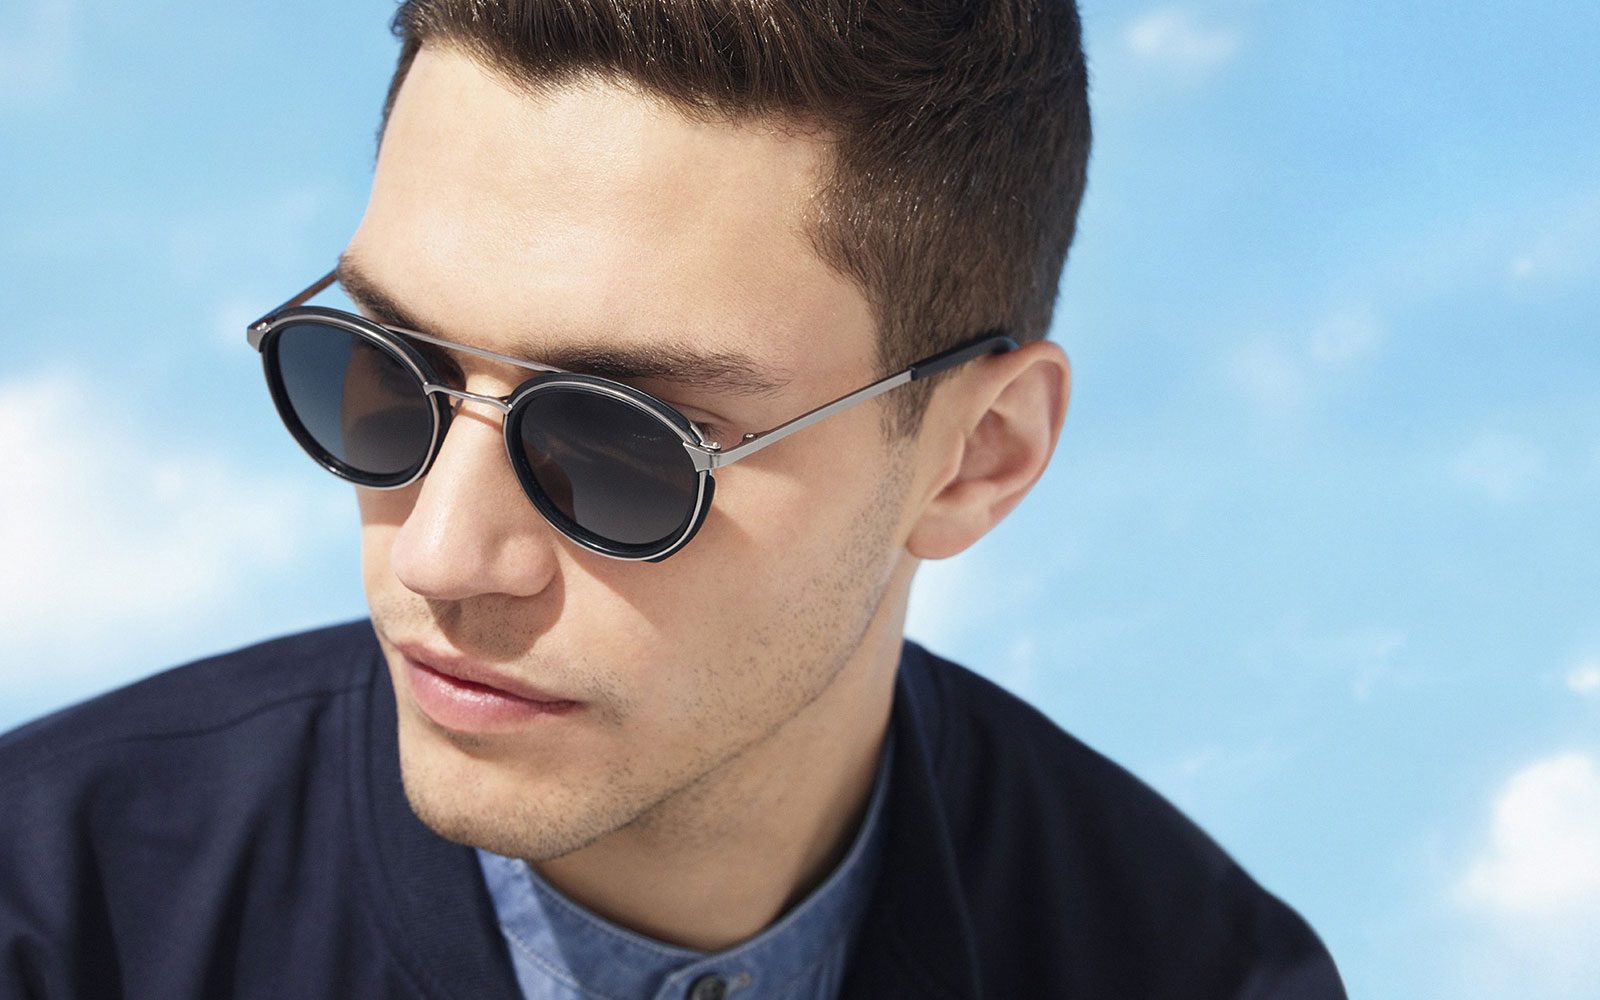 The Best Men's Sunglasses for Your Face Shape The GentleManual A